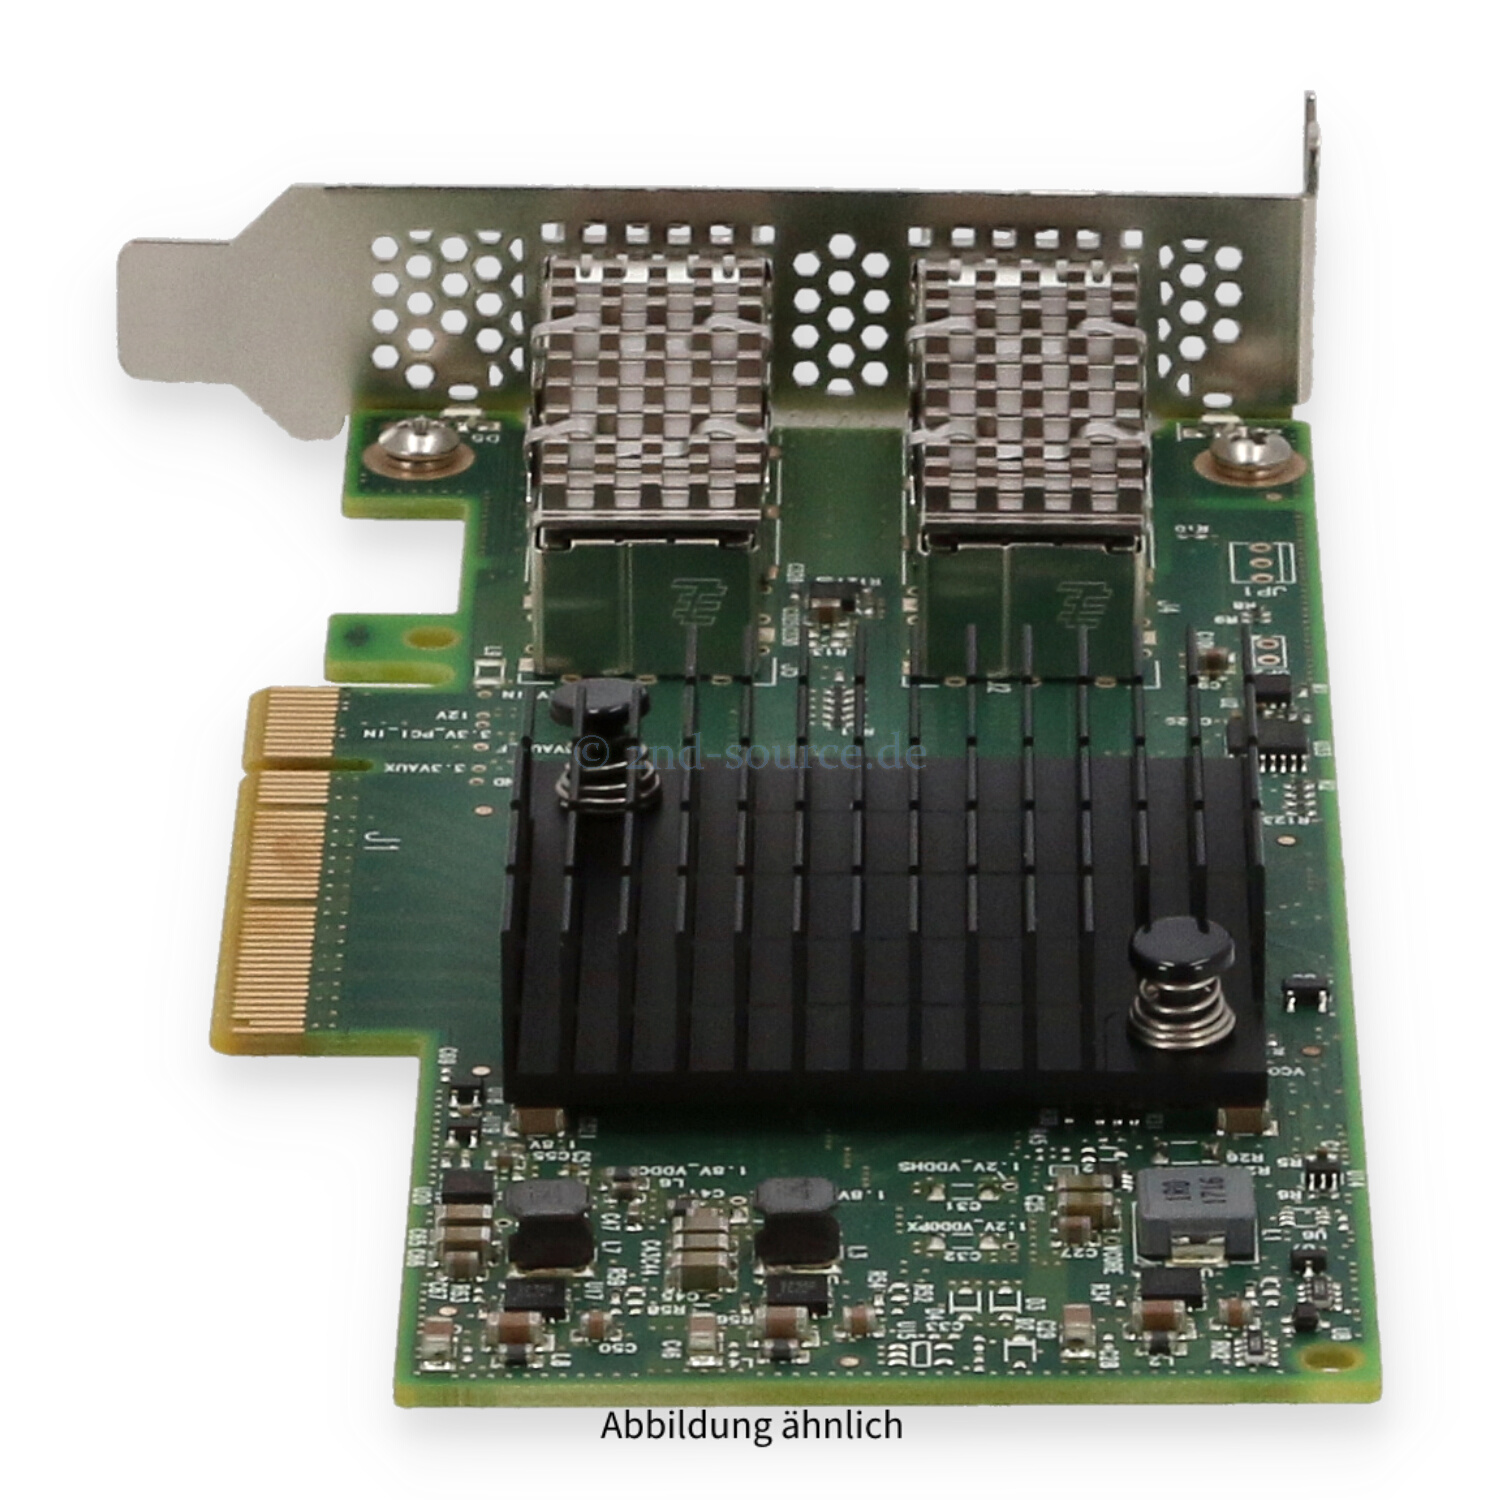 Mellanox CX4121A ConnectX-4LX 2x SFP+ 10GbE PCIe Ethernet Adapter Low Profile inkl. 2x GBIC